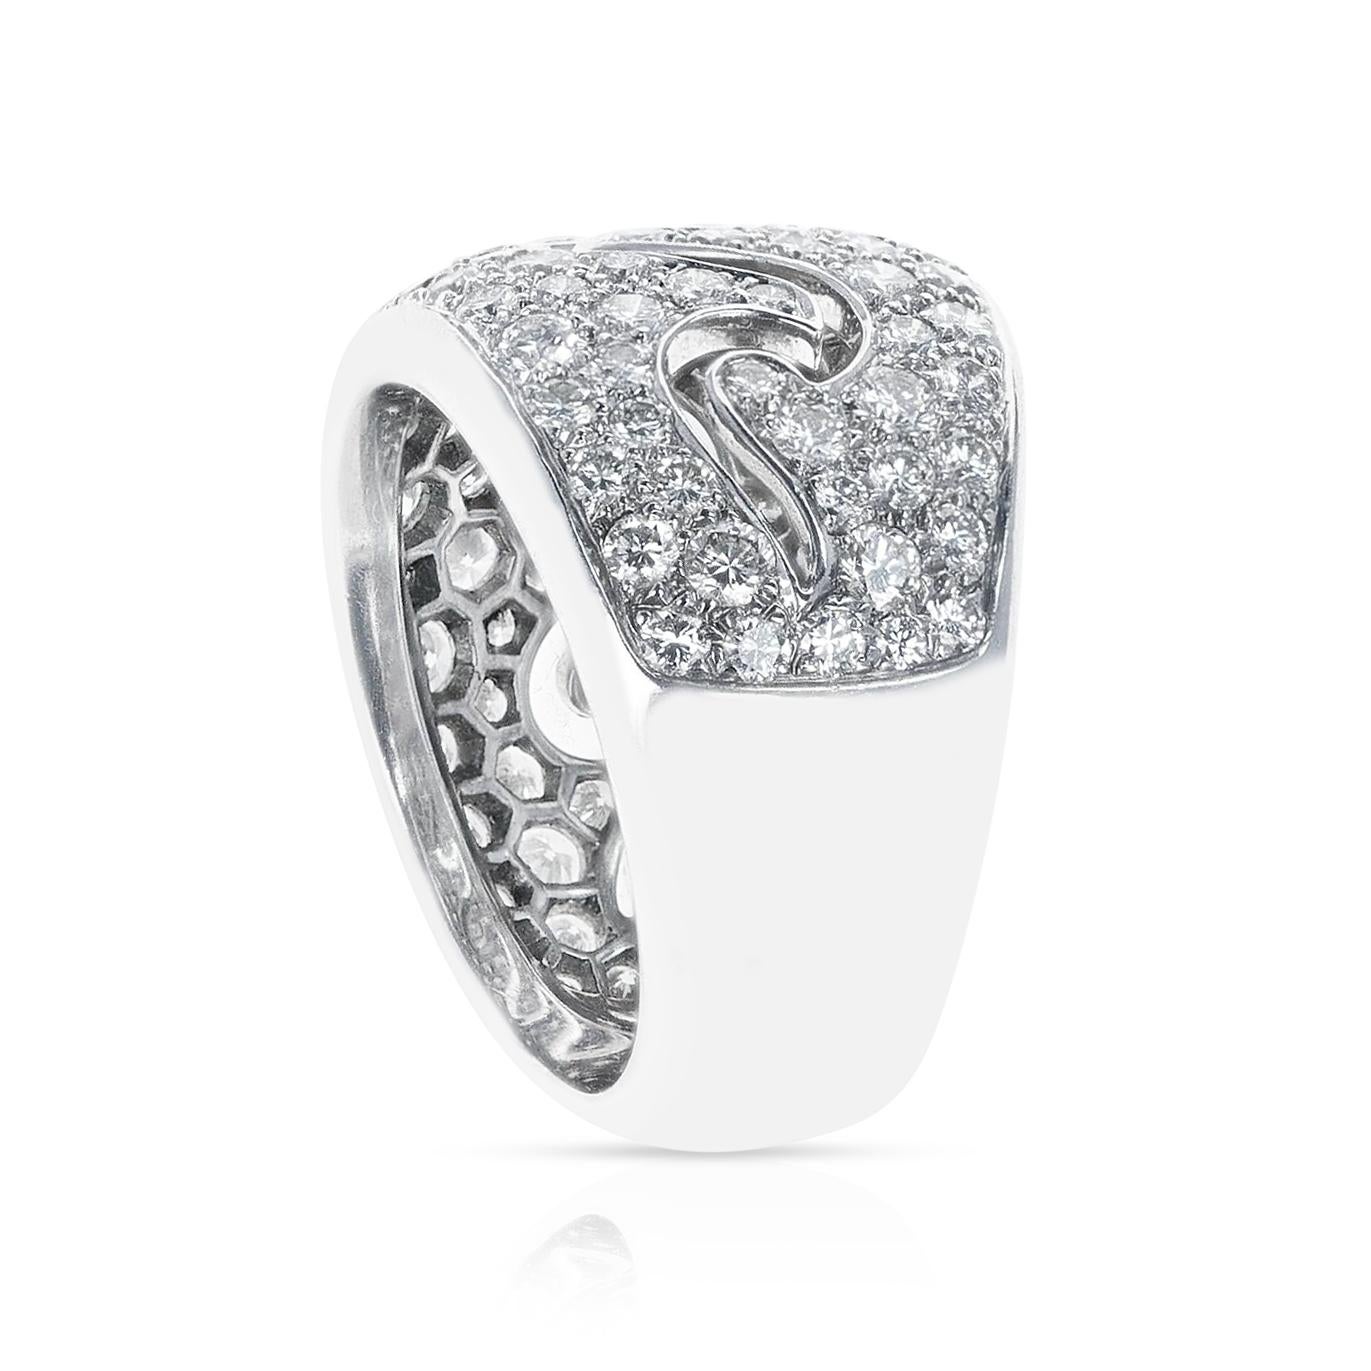 A French Van Cleef & Arpels Diamond Wave Ring made in 18k White Gold. The ring size is 5.75 US.  

SKU 545